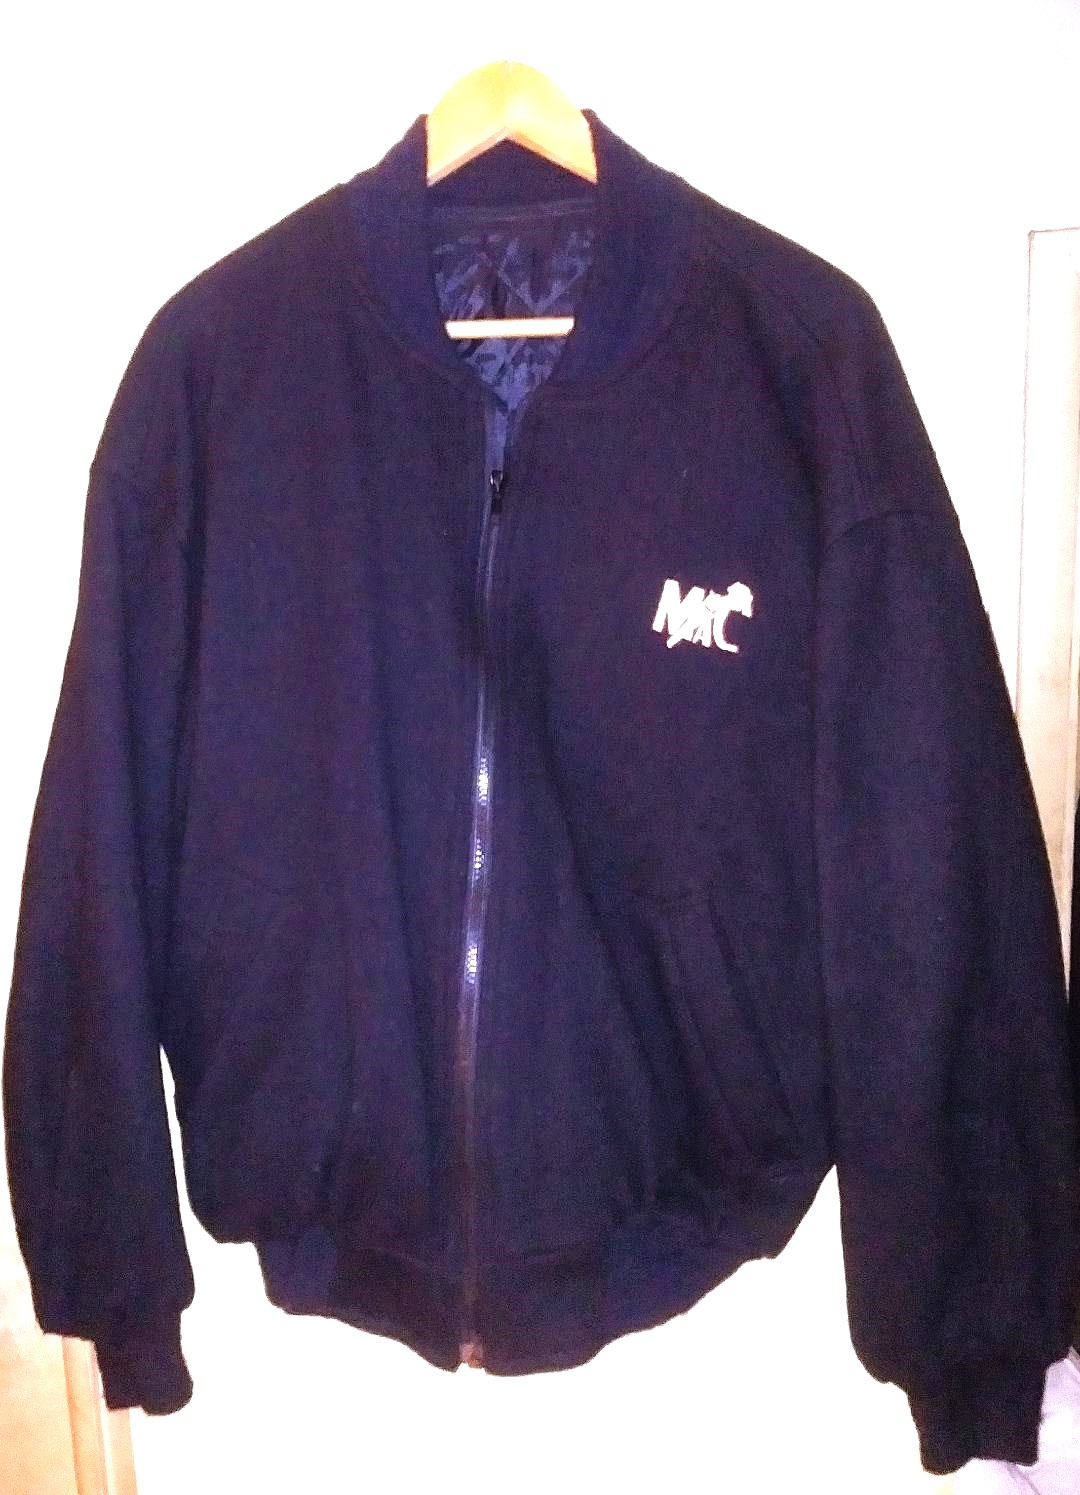 Unusual jacket find! Is this a early MAC tools logo? Or a carpenter's ...